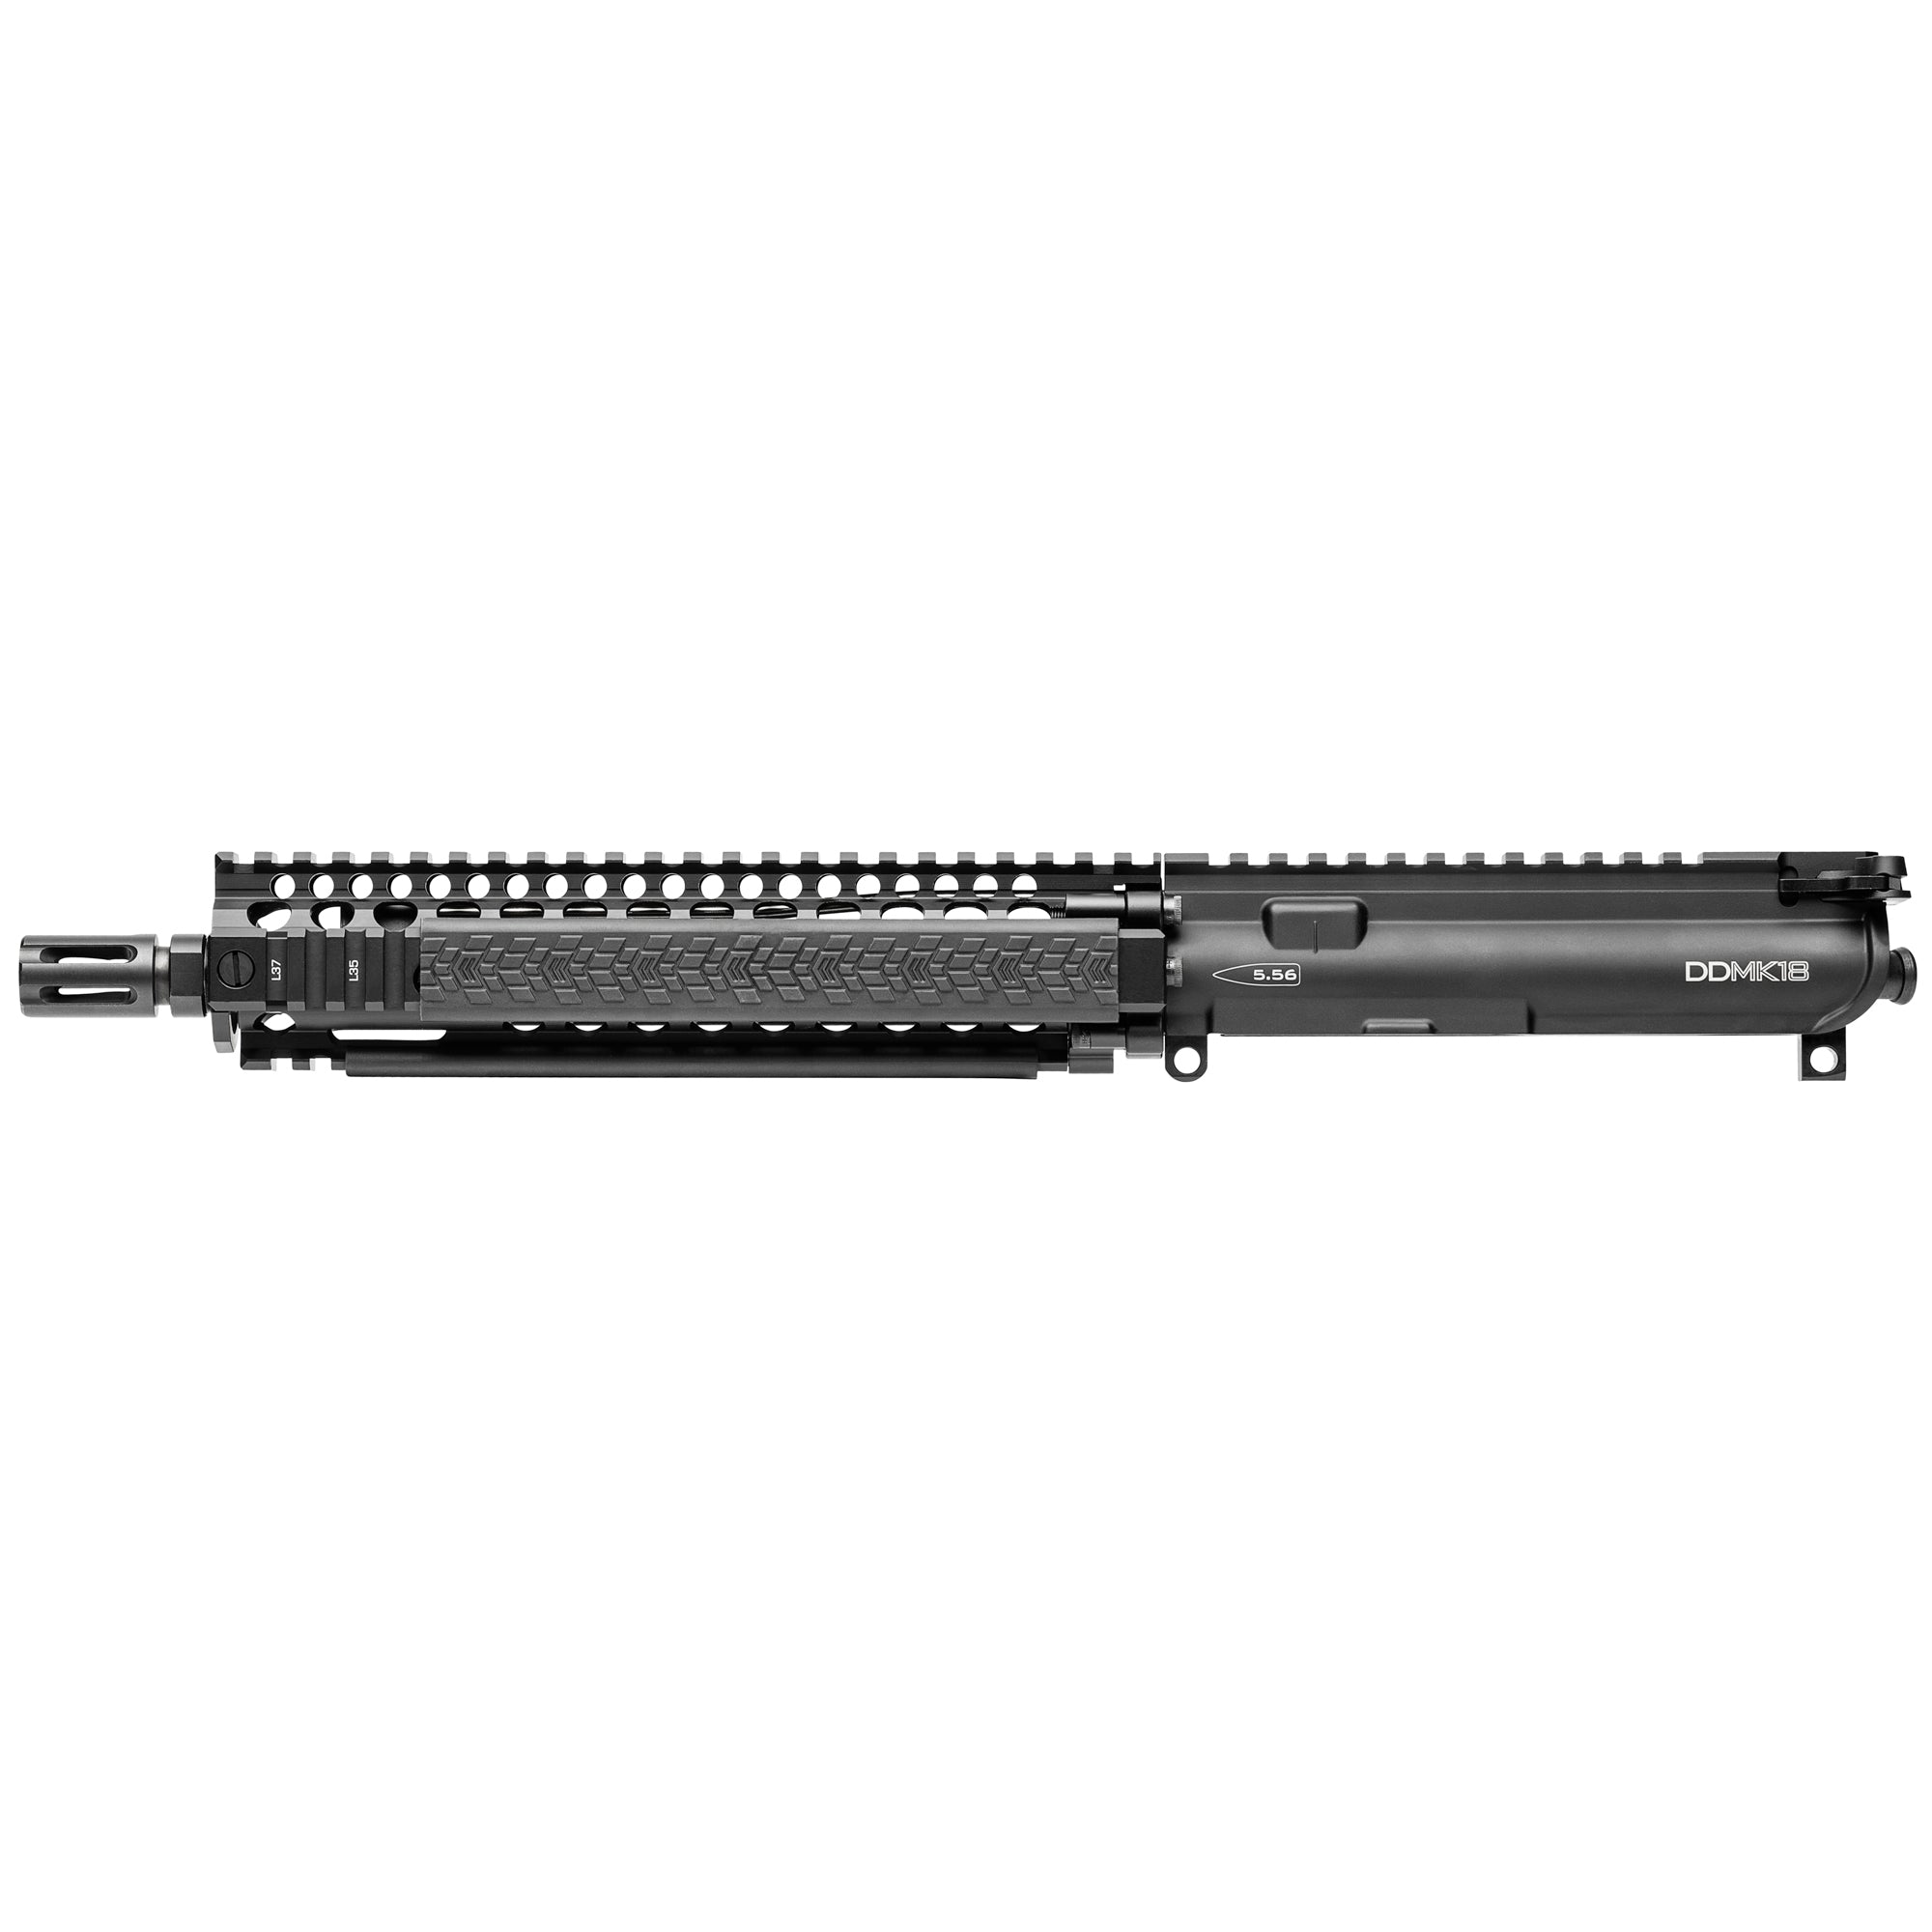 Daniel Defense MK18 Complete Upper Receiver in black, featuring a 10.3-inch cold hammer-forged barrel, RIS II MK18 handguard, and equipped with M16 BCG and flash suppressor